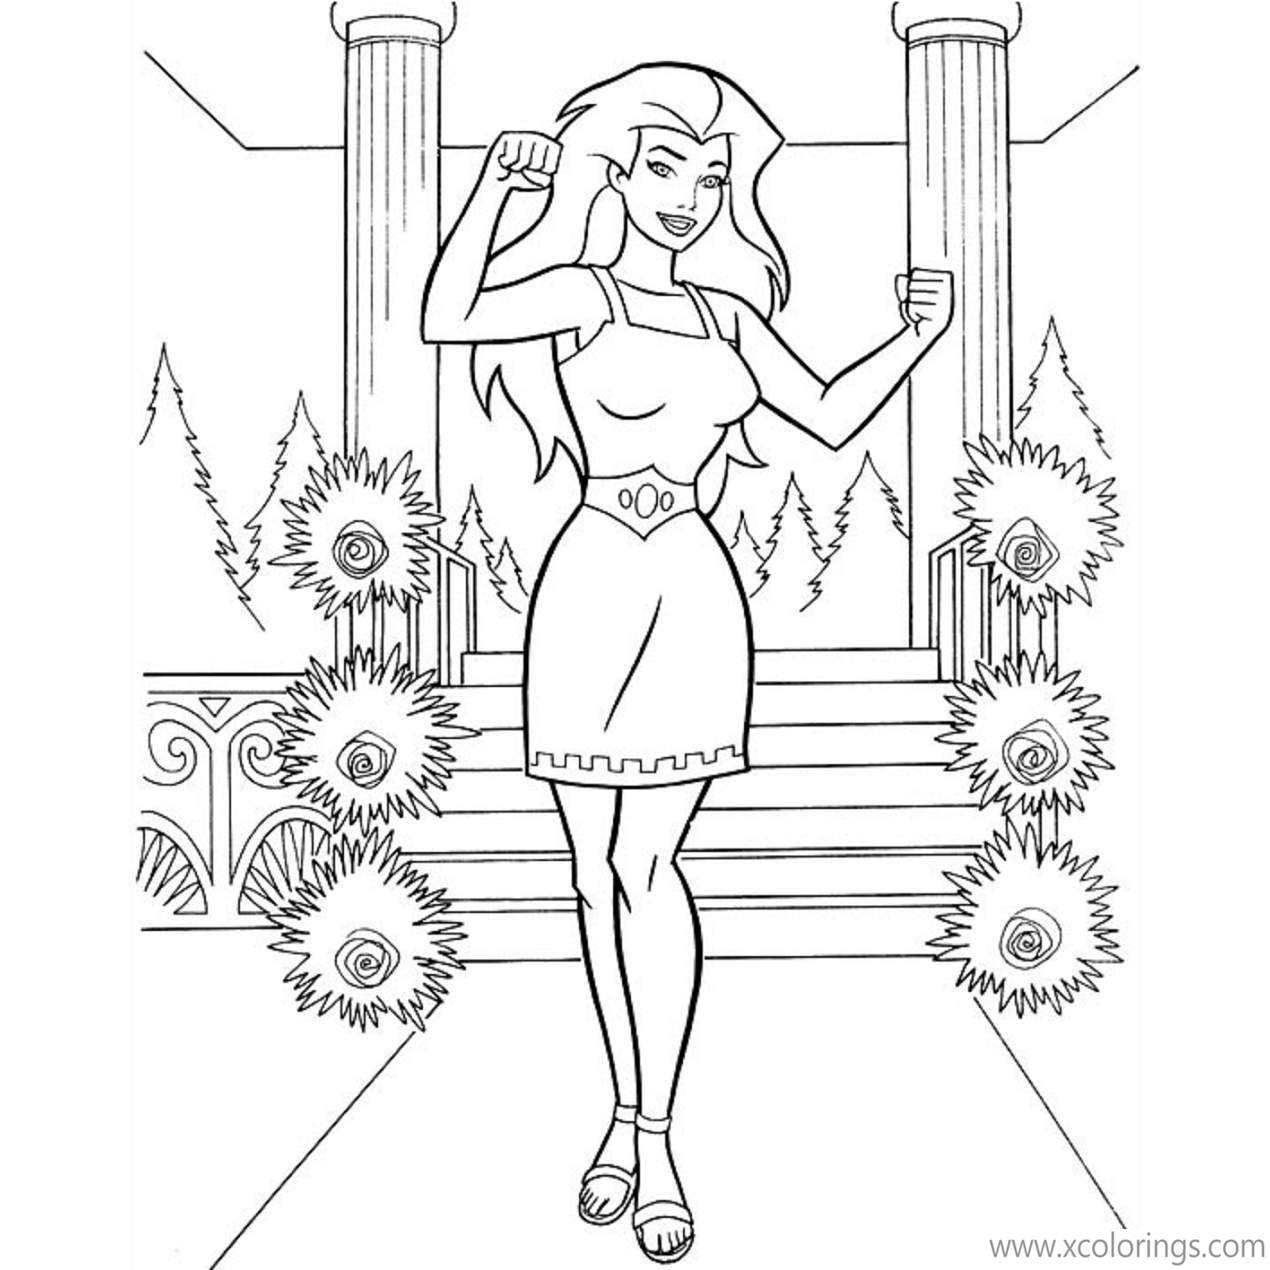 Free Animated Wonder Woman is Dancing Coloring Pages printable